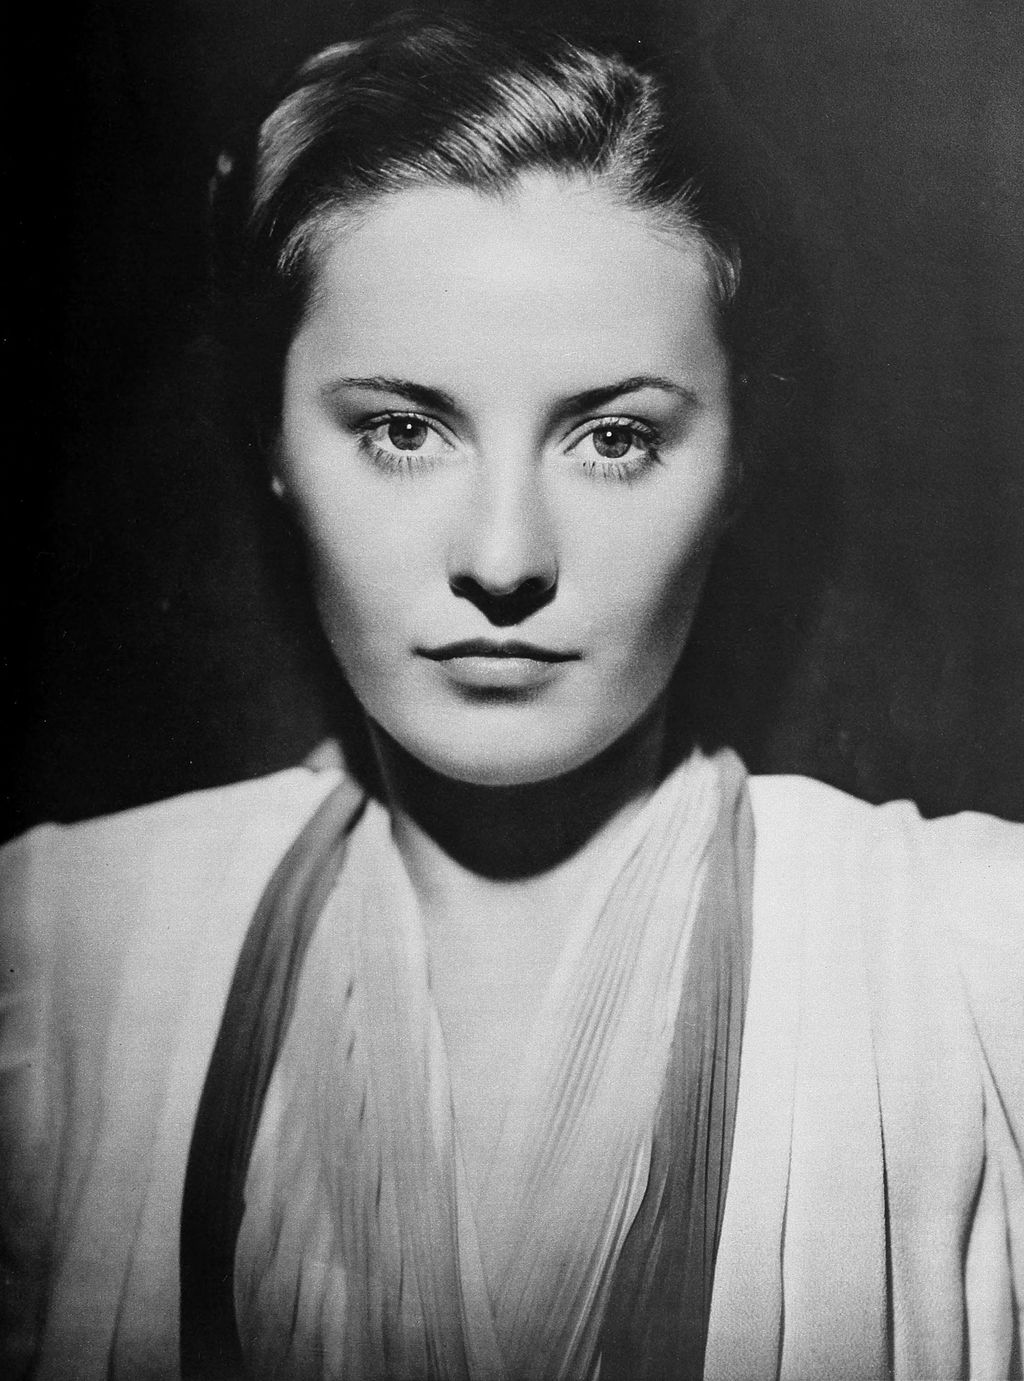 Portrait of Barbara Stanwyck by George Hurrell on June 1, 1938. | Photo: Wikimedia Commons